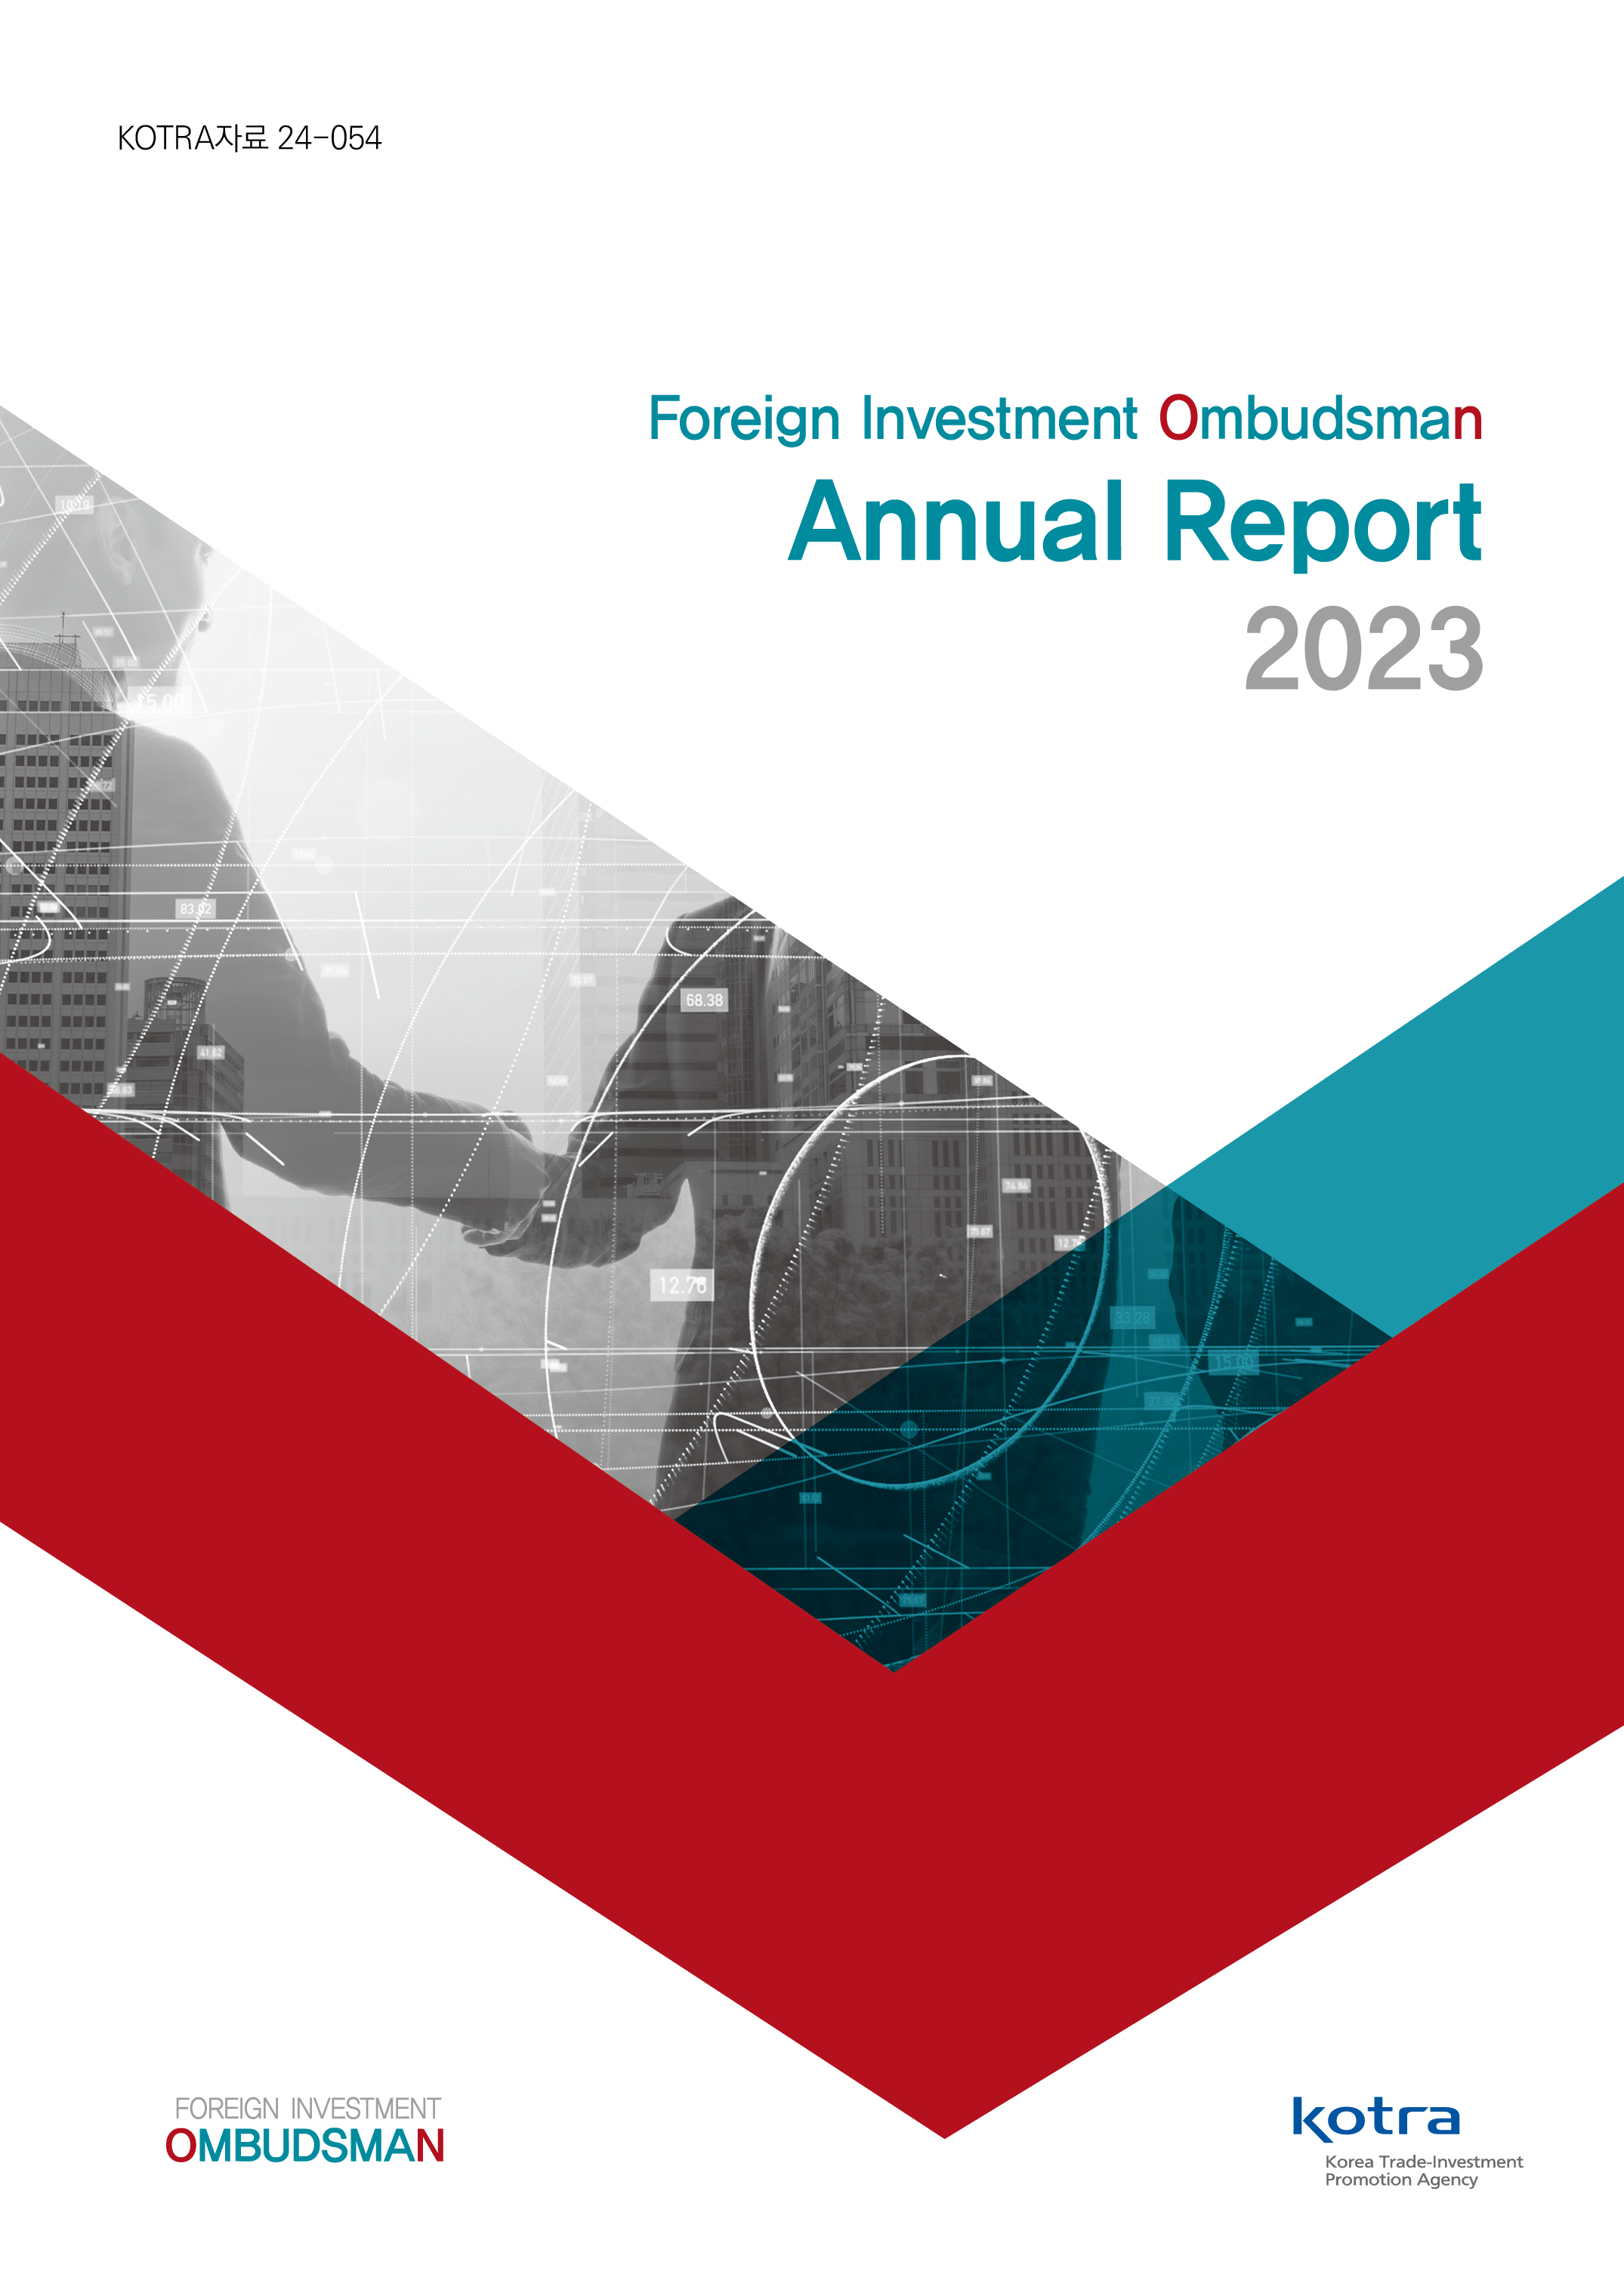 2023 Annual Report of the Foreign Investment Ombudsman